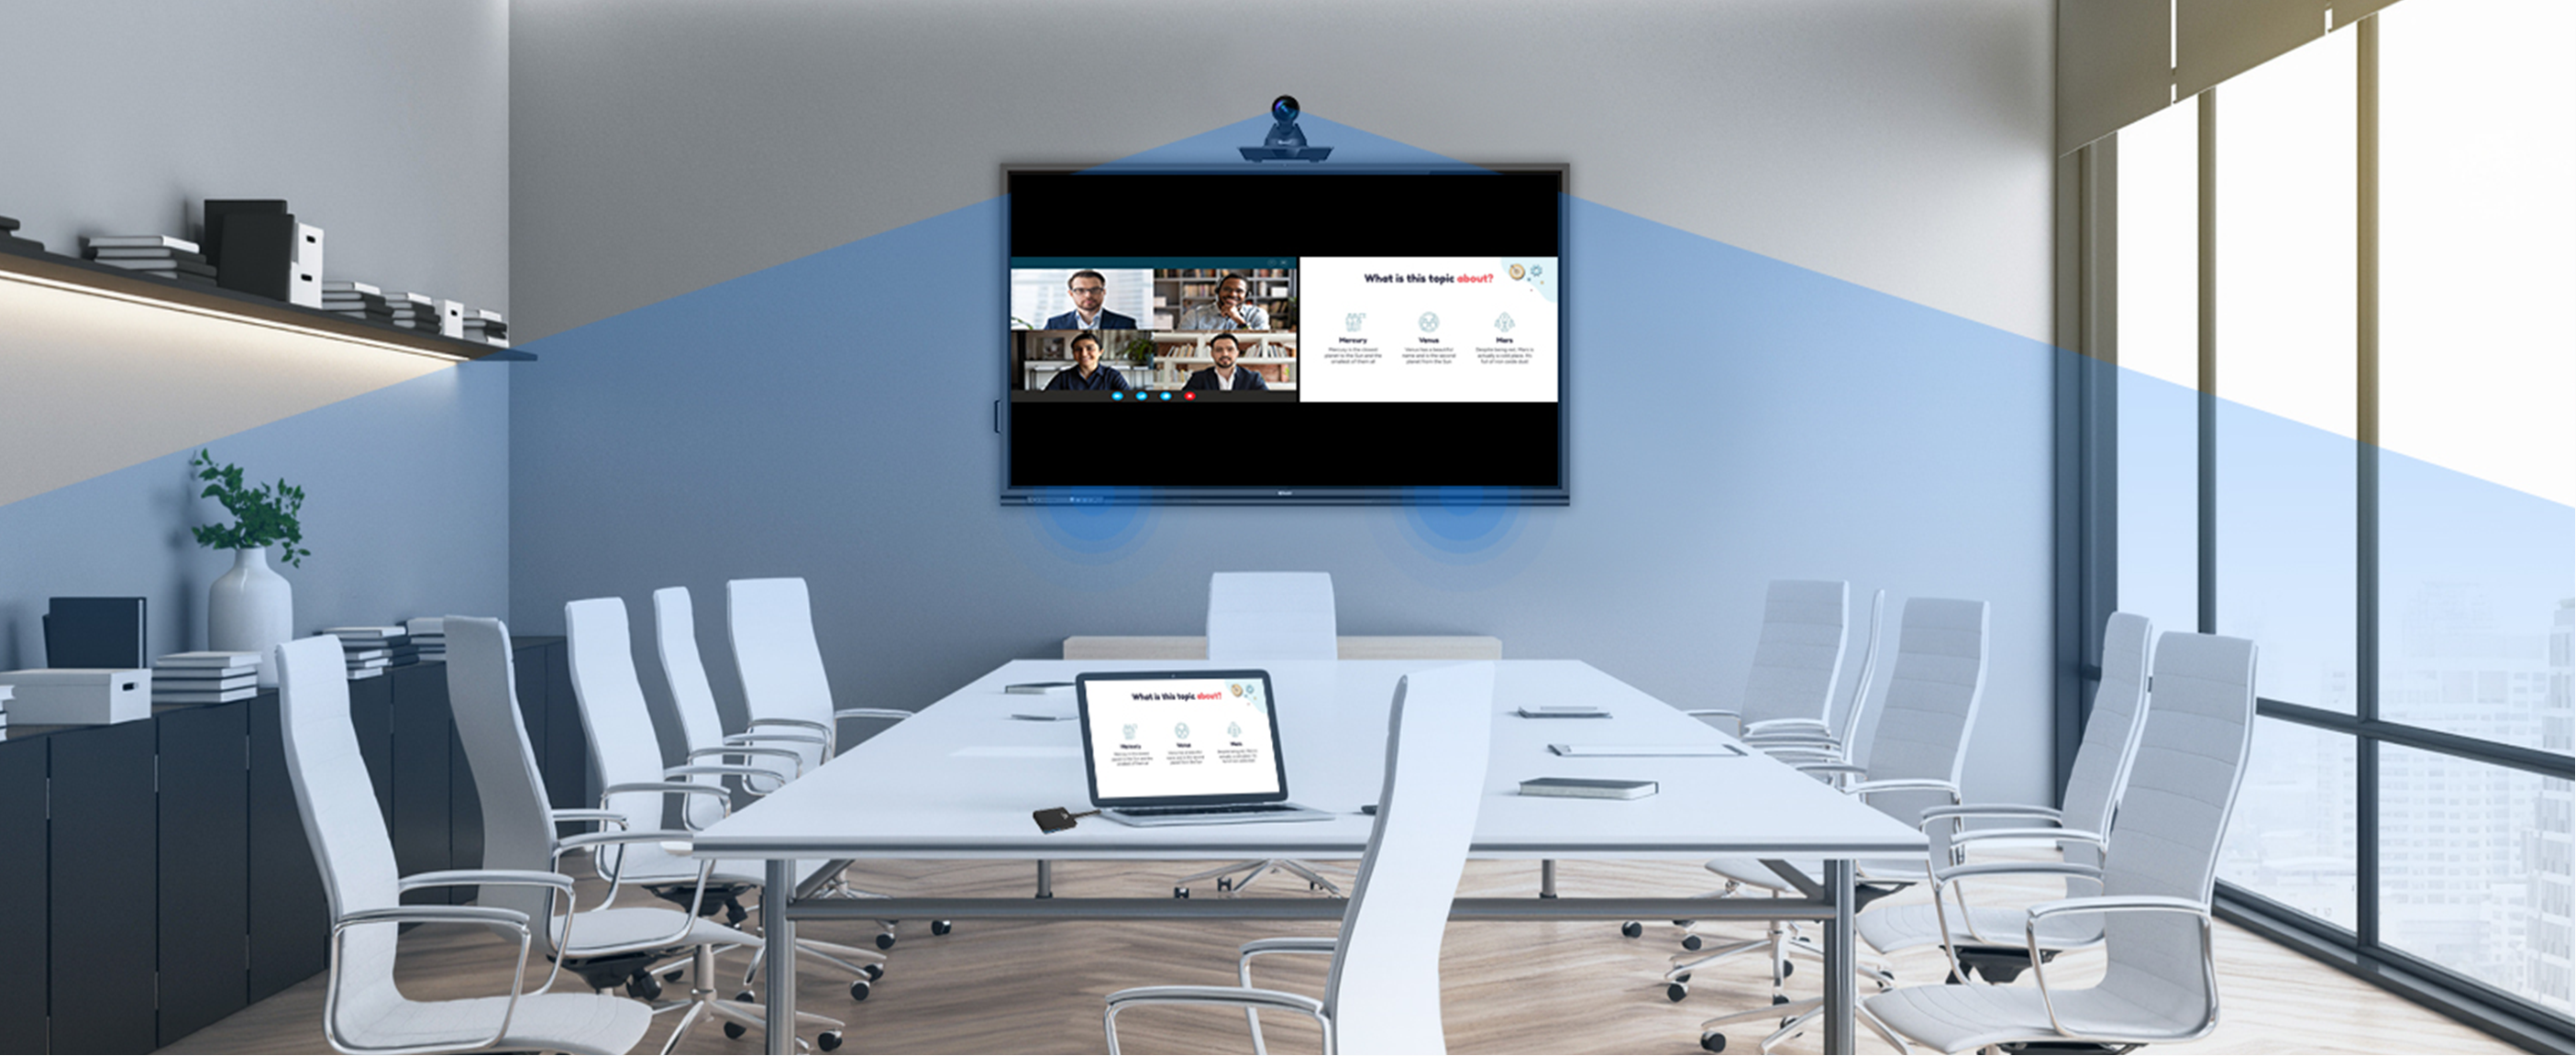 IQ Smart Meeting Room Solutions for Video Conferencing System-IQBoard